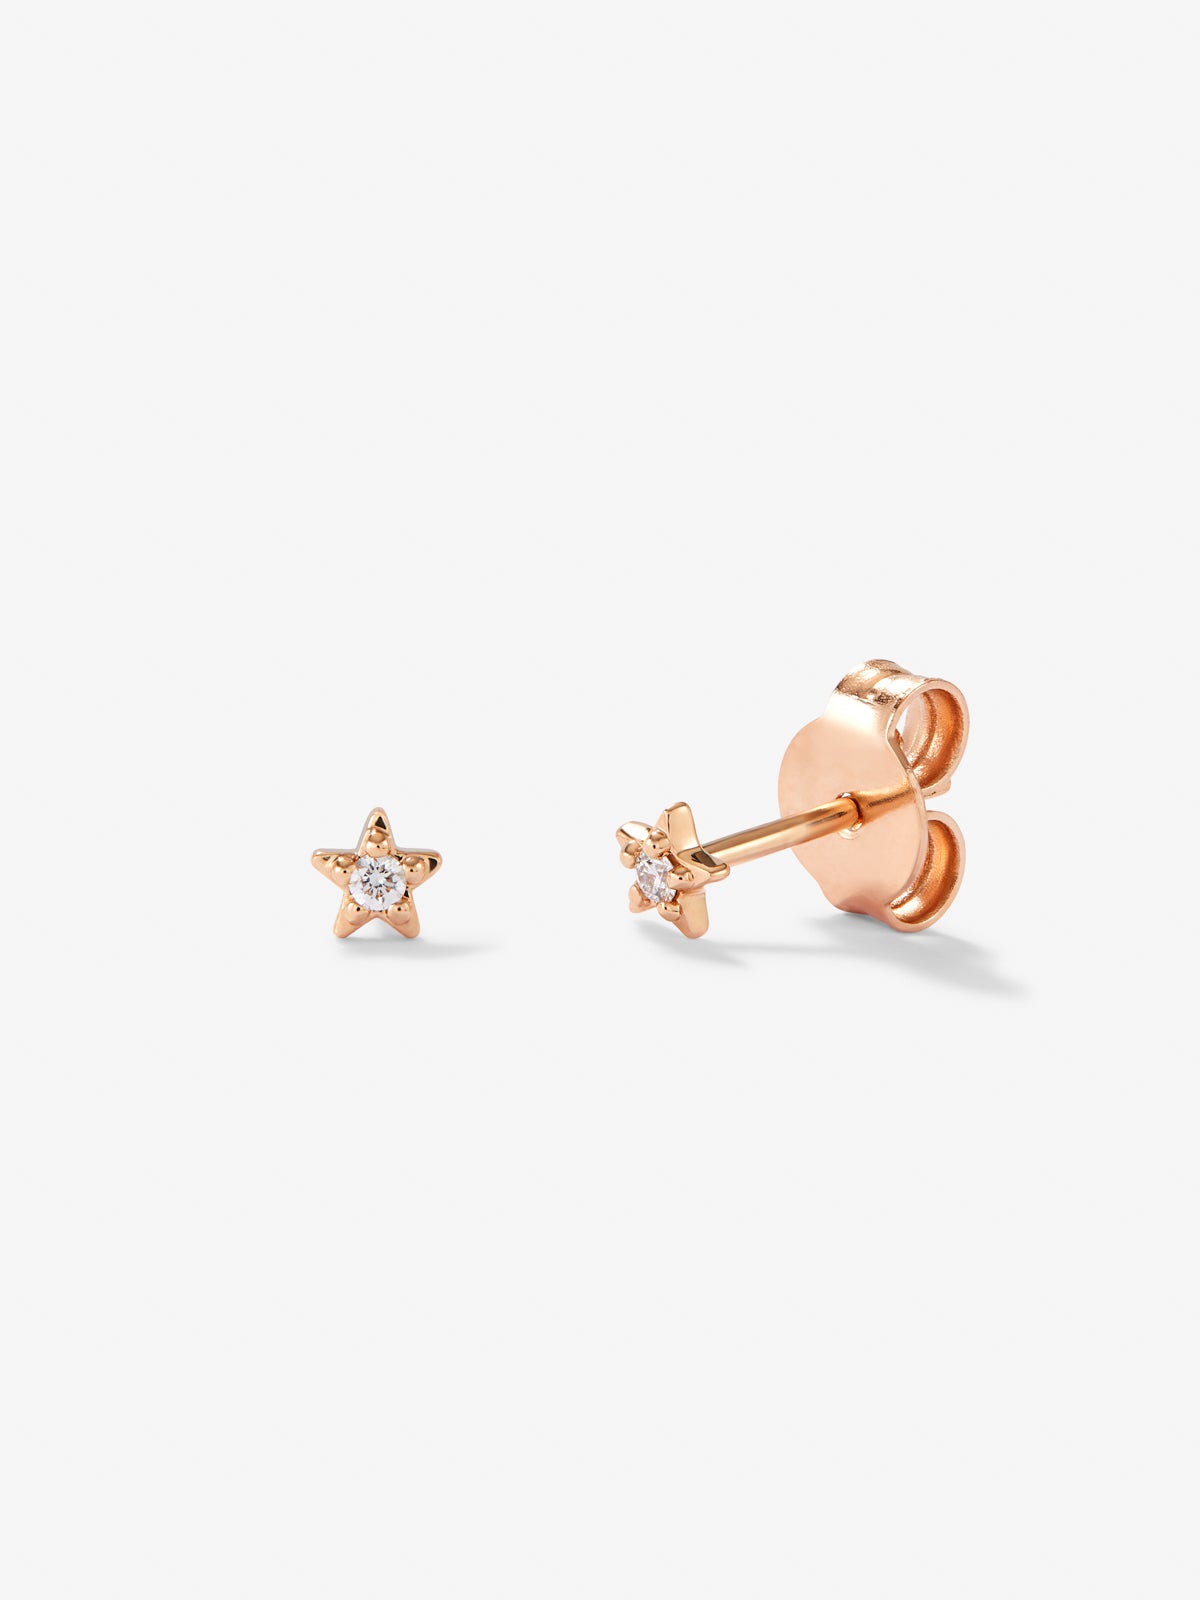 18K rose gold earrings with 2 brilliant-cut diamonds with a total of 0.03 cts